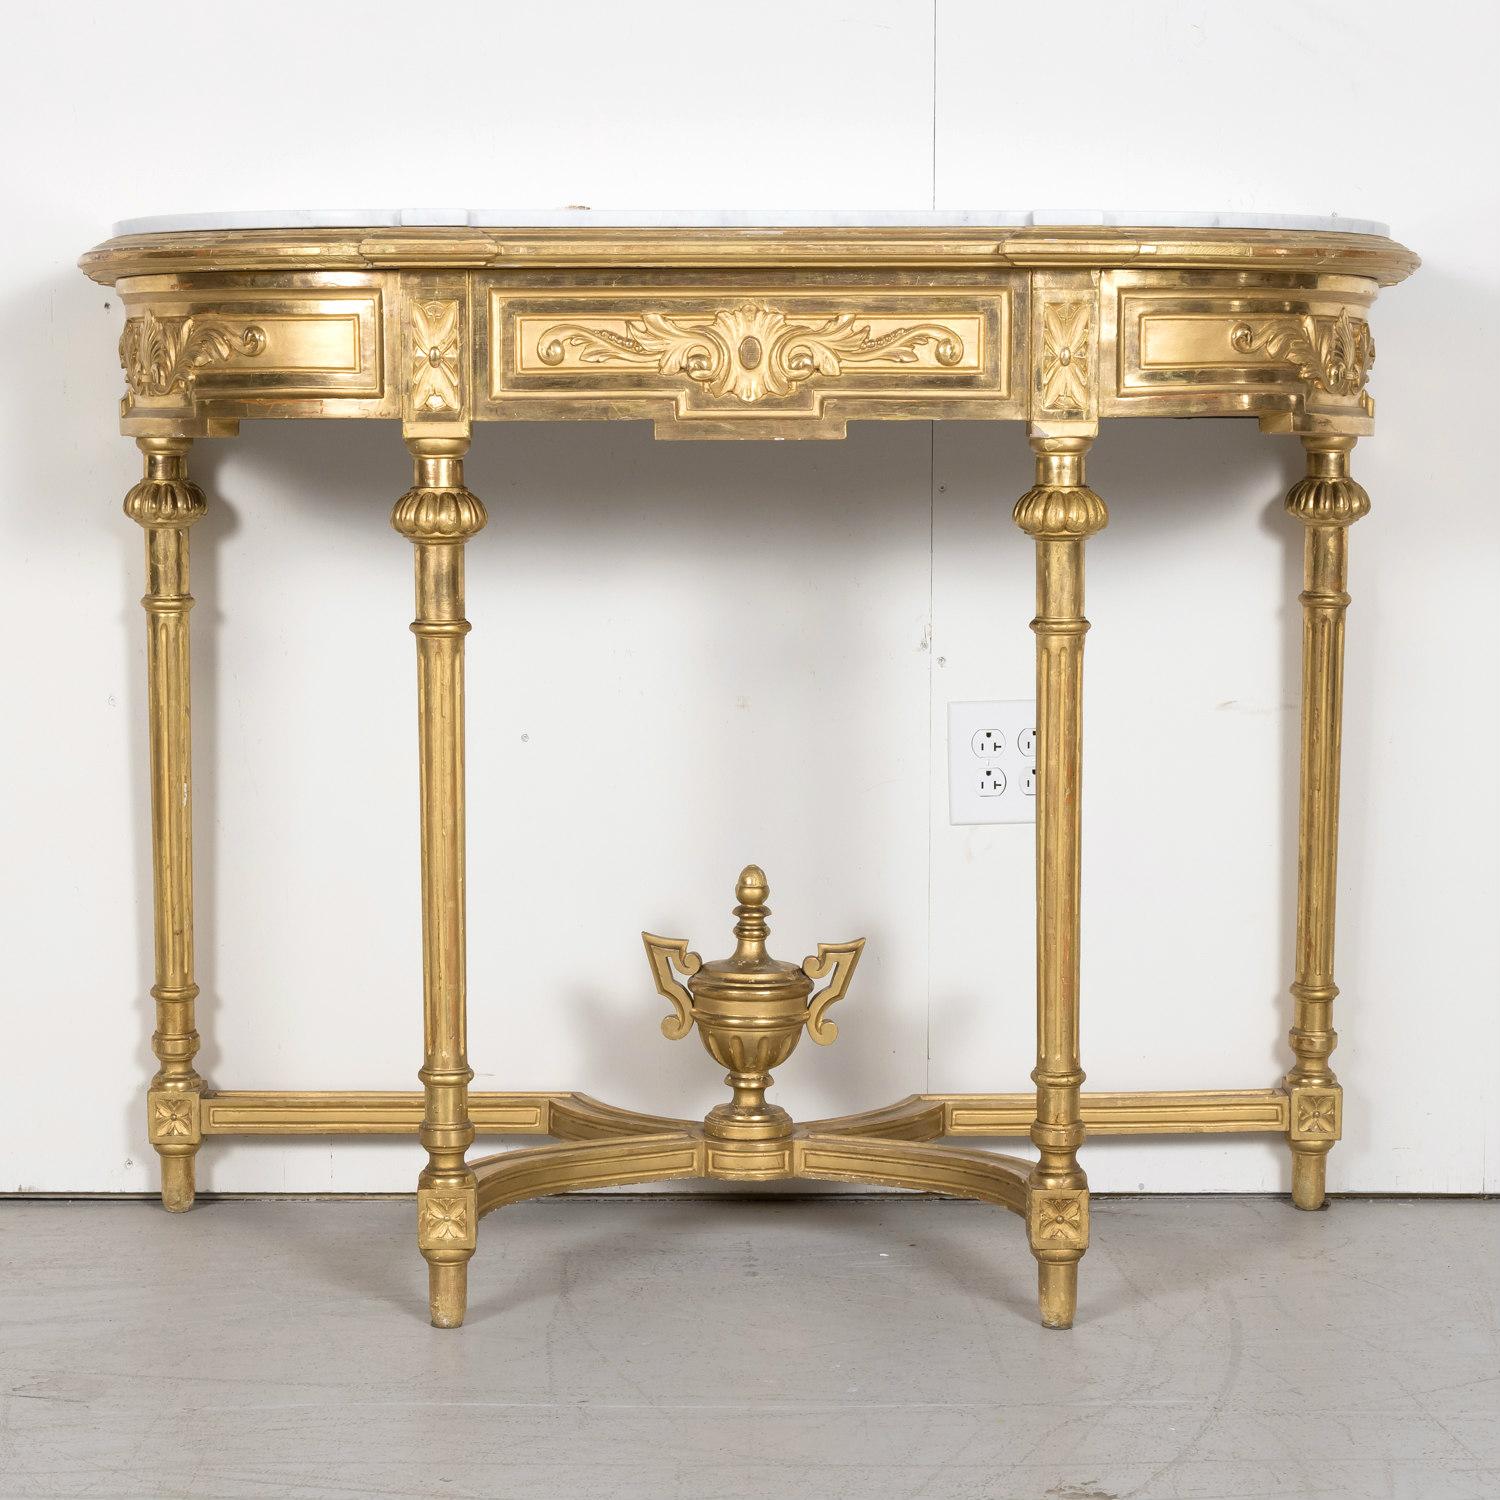 A striking 19th century French Louis XVI style carved giltwood wall console having the original shaped Carrara marble top above a giltwood frame, circa 1880s. This lovely neoclassical console features a shaped and beautifully carved frieze with